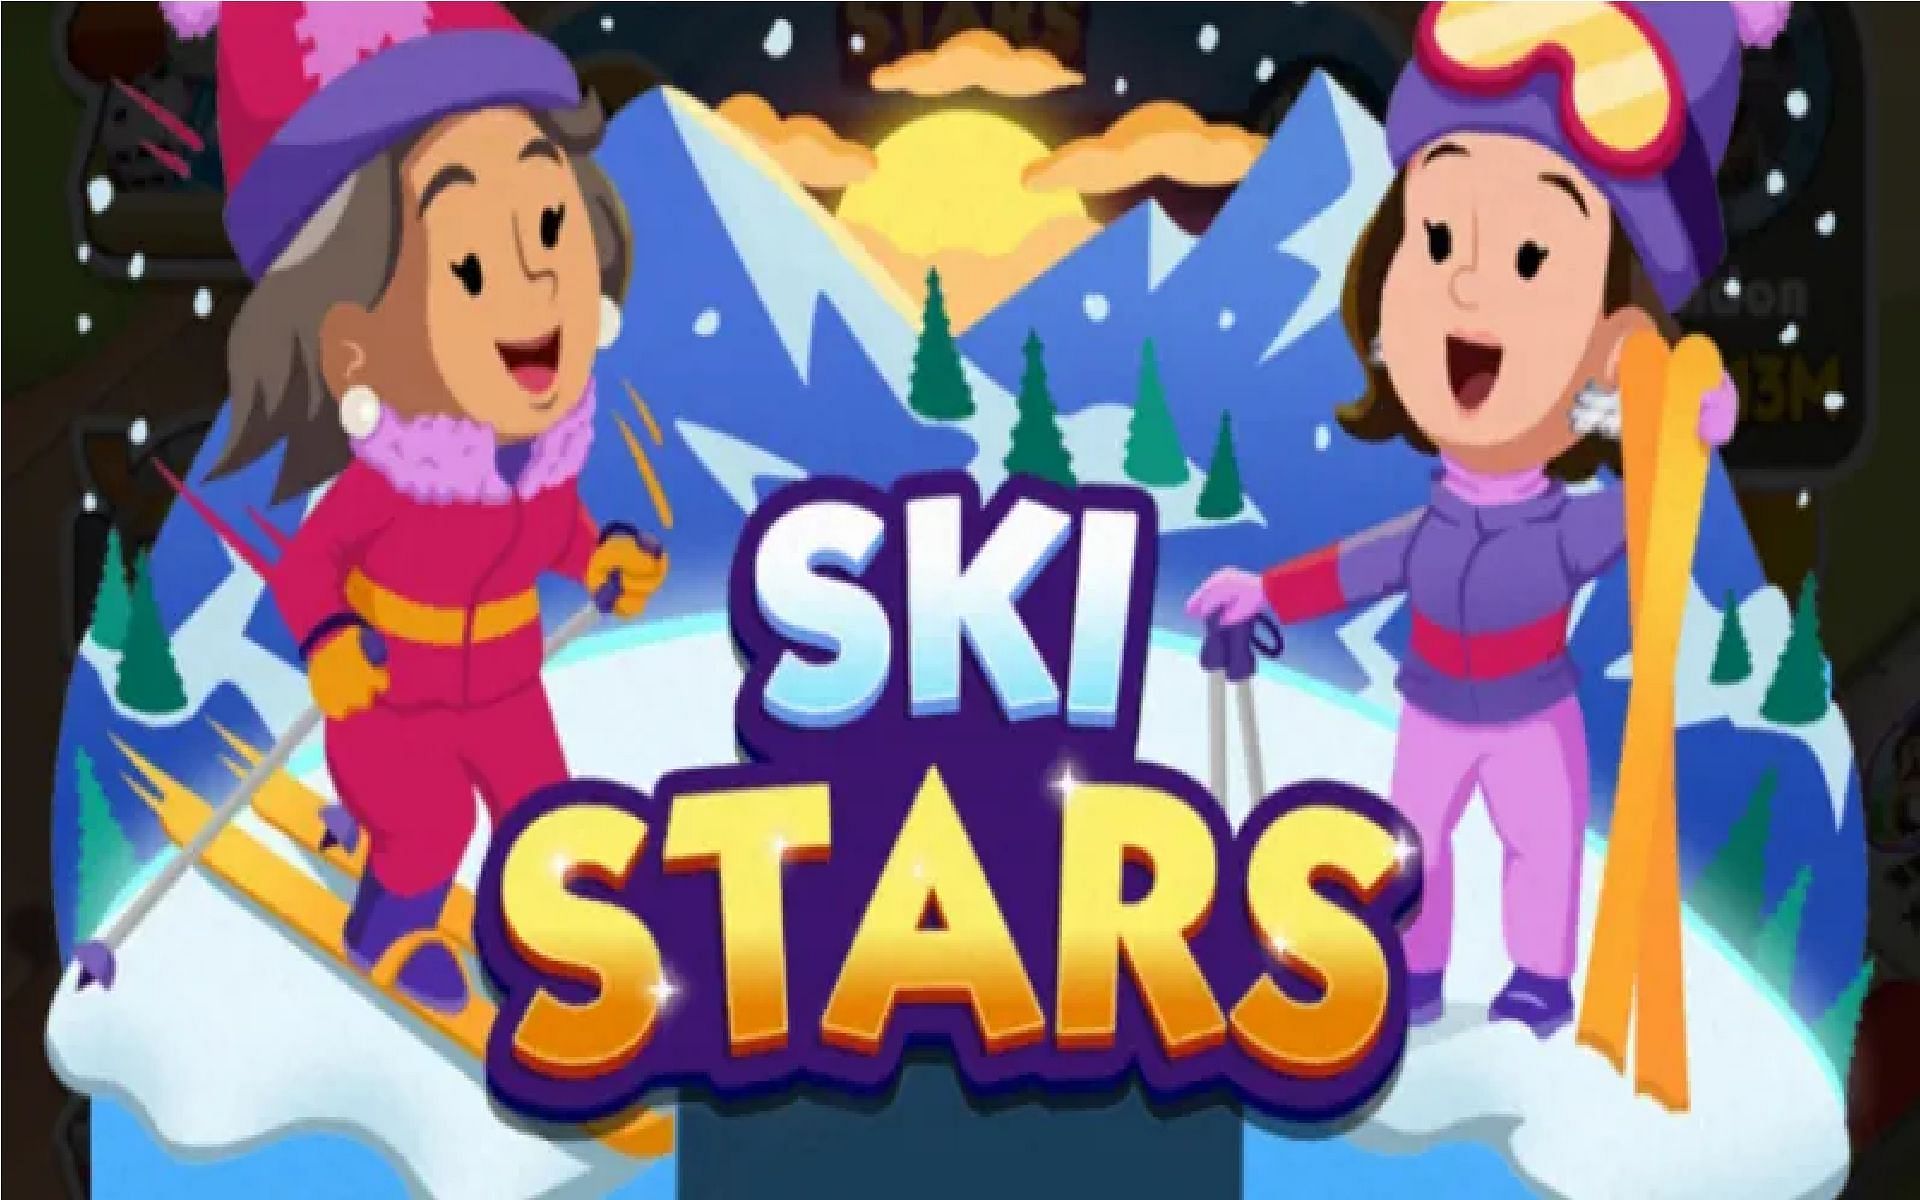 Ski Stars is the current event in the game (Image via Scopely)